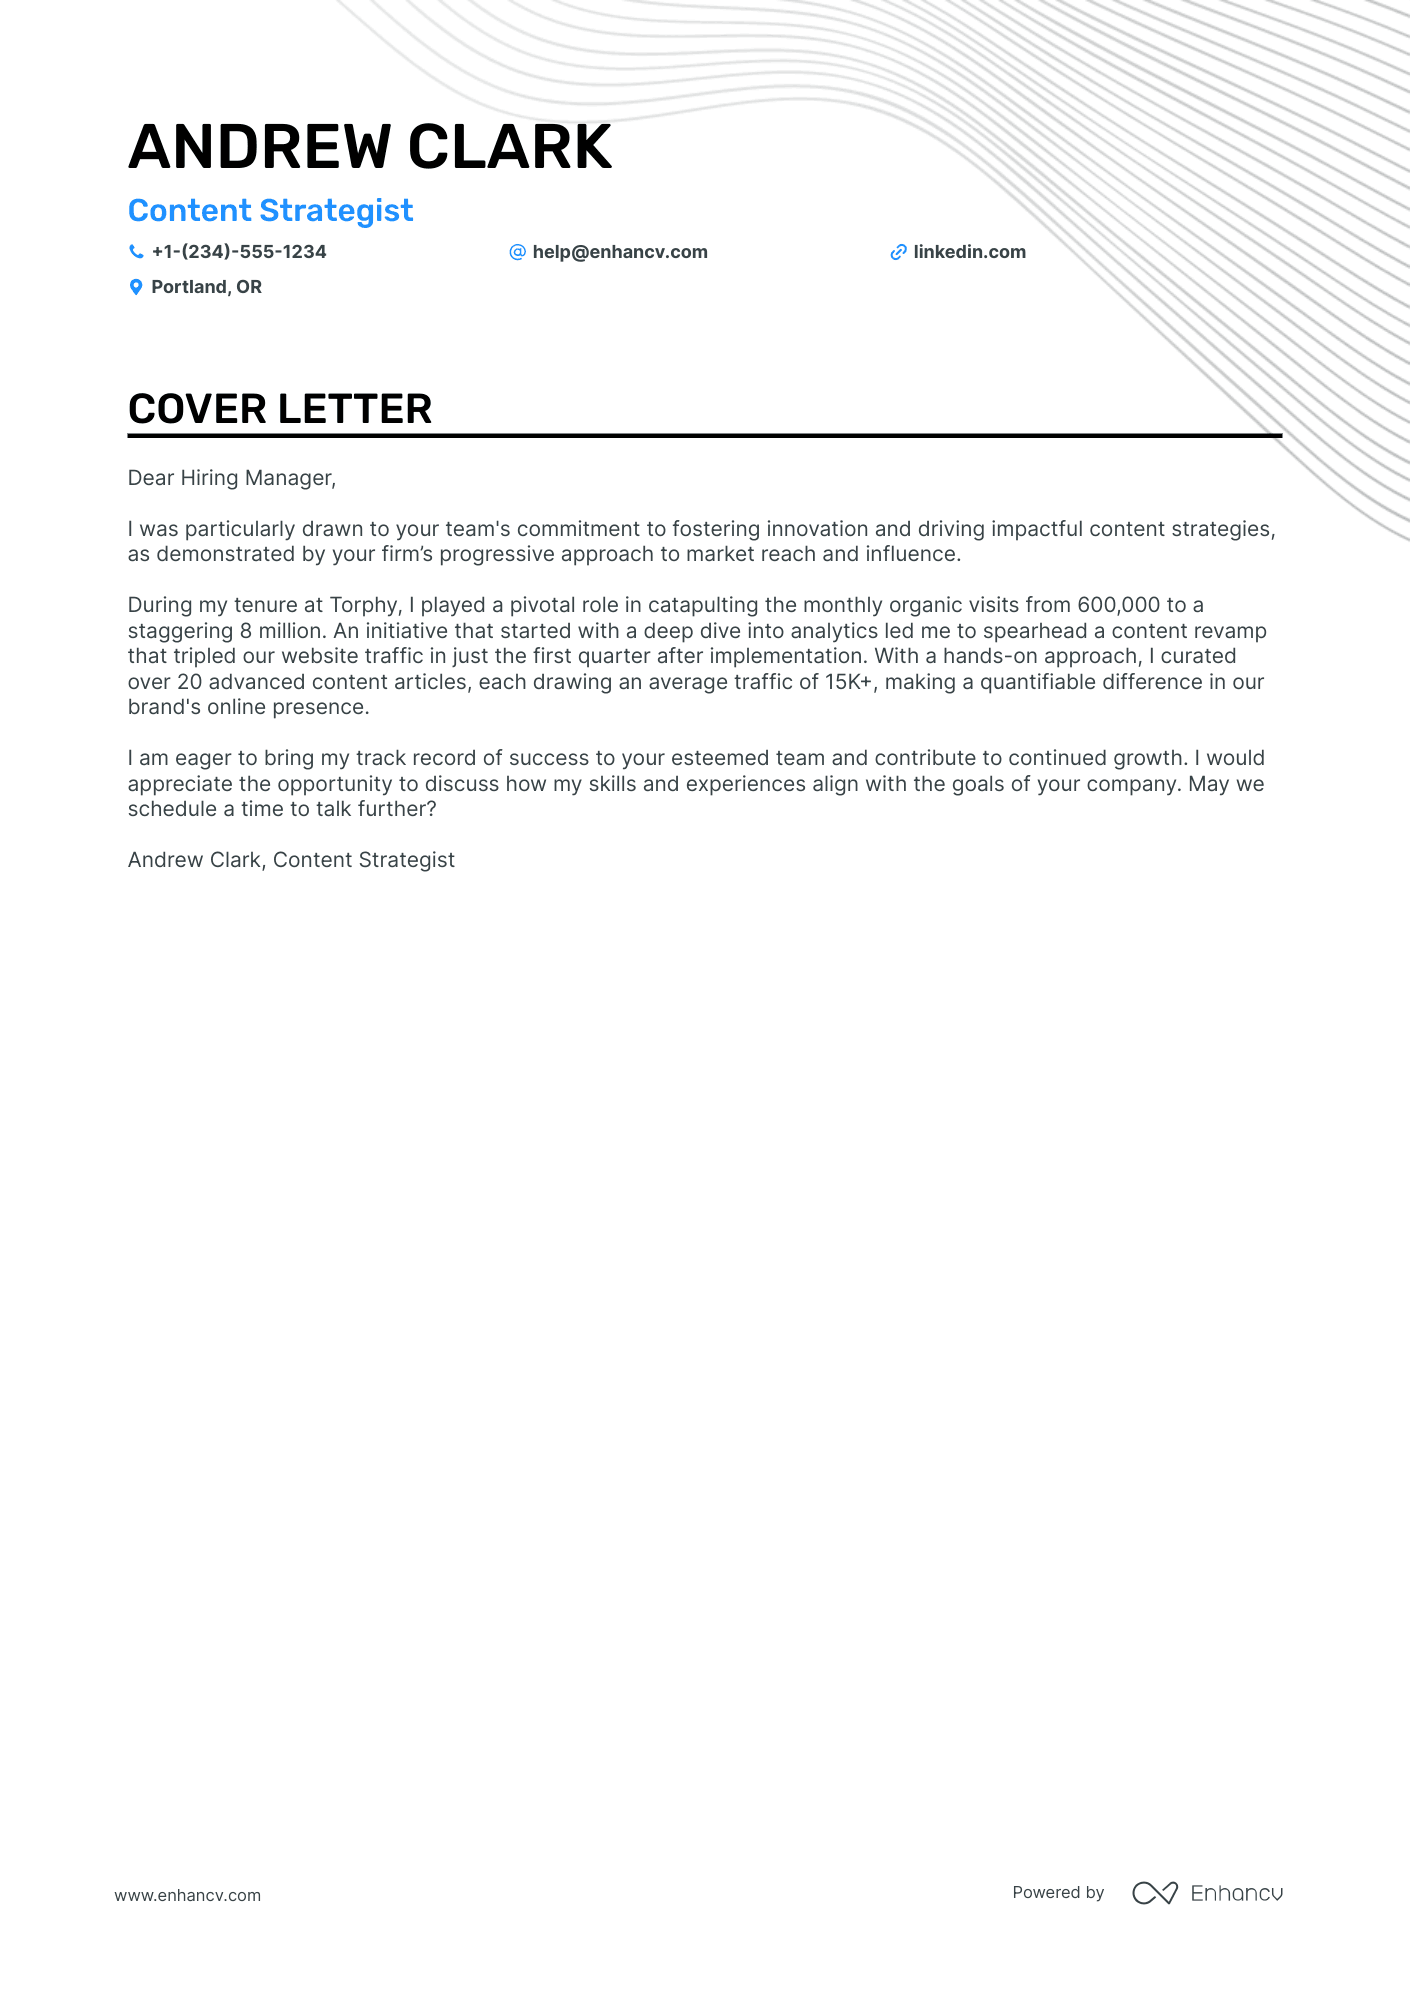 Content Strategist cover letter